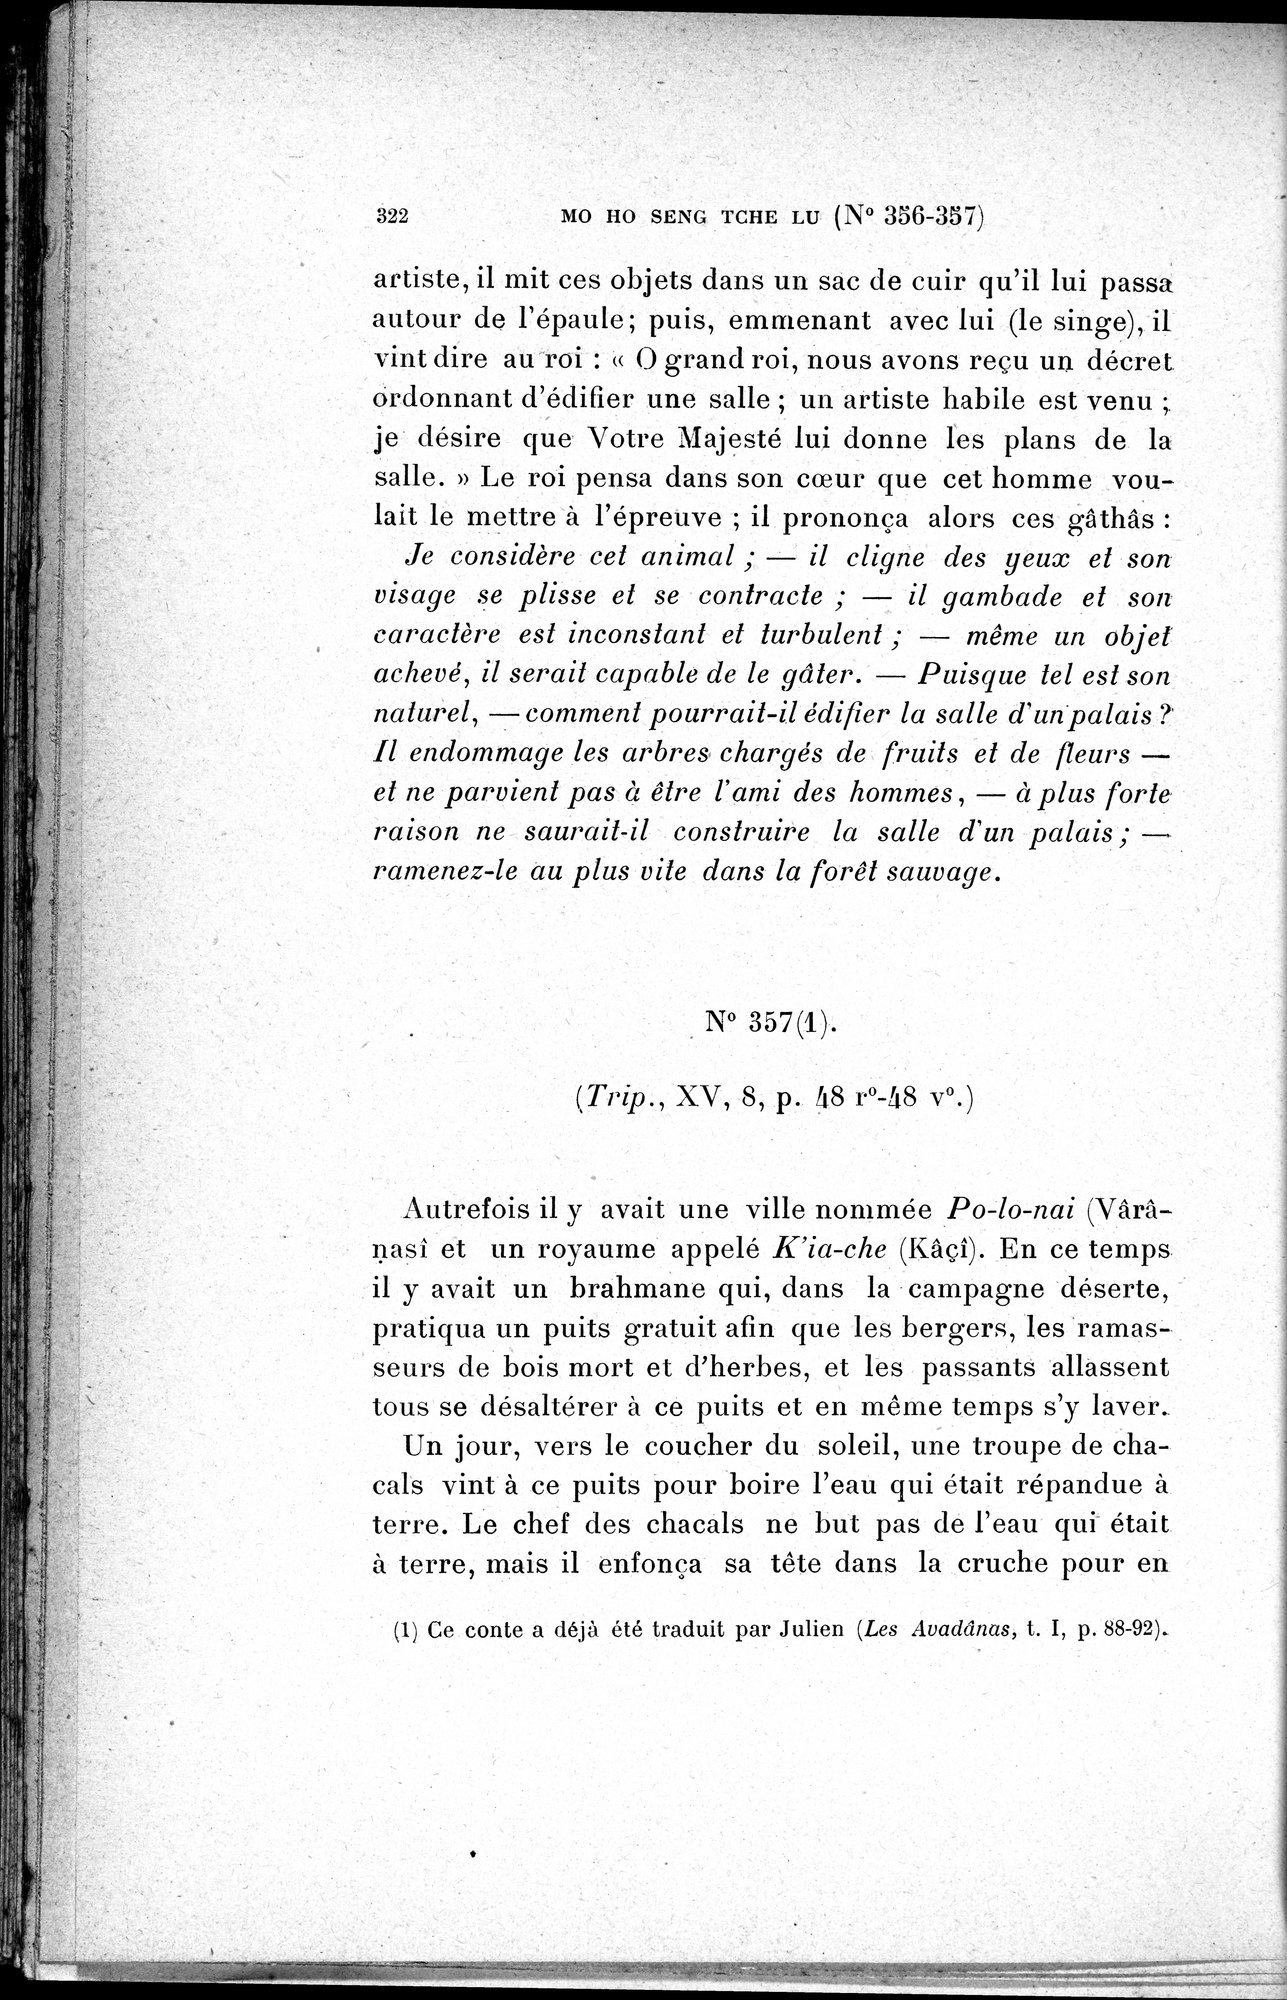 Cinq Cents Contes et Apologues : vol.2 / Page 336 (Grayscale High Resolution Image)